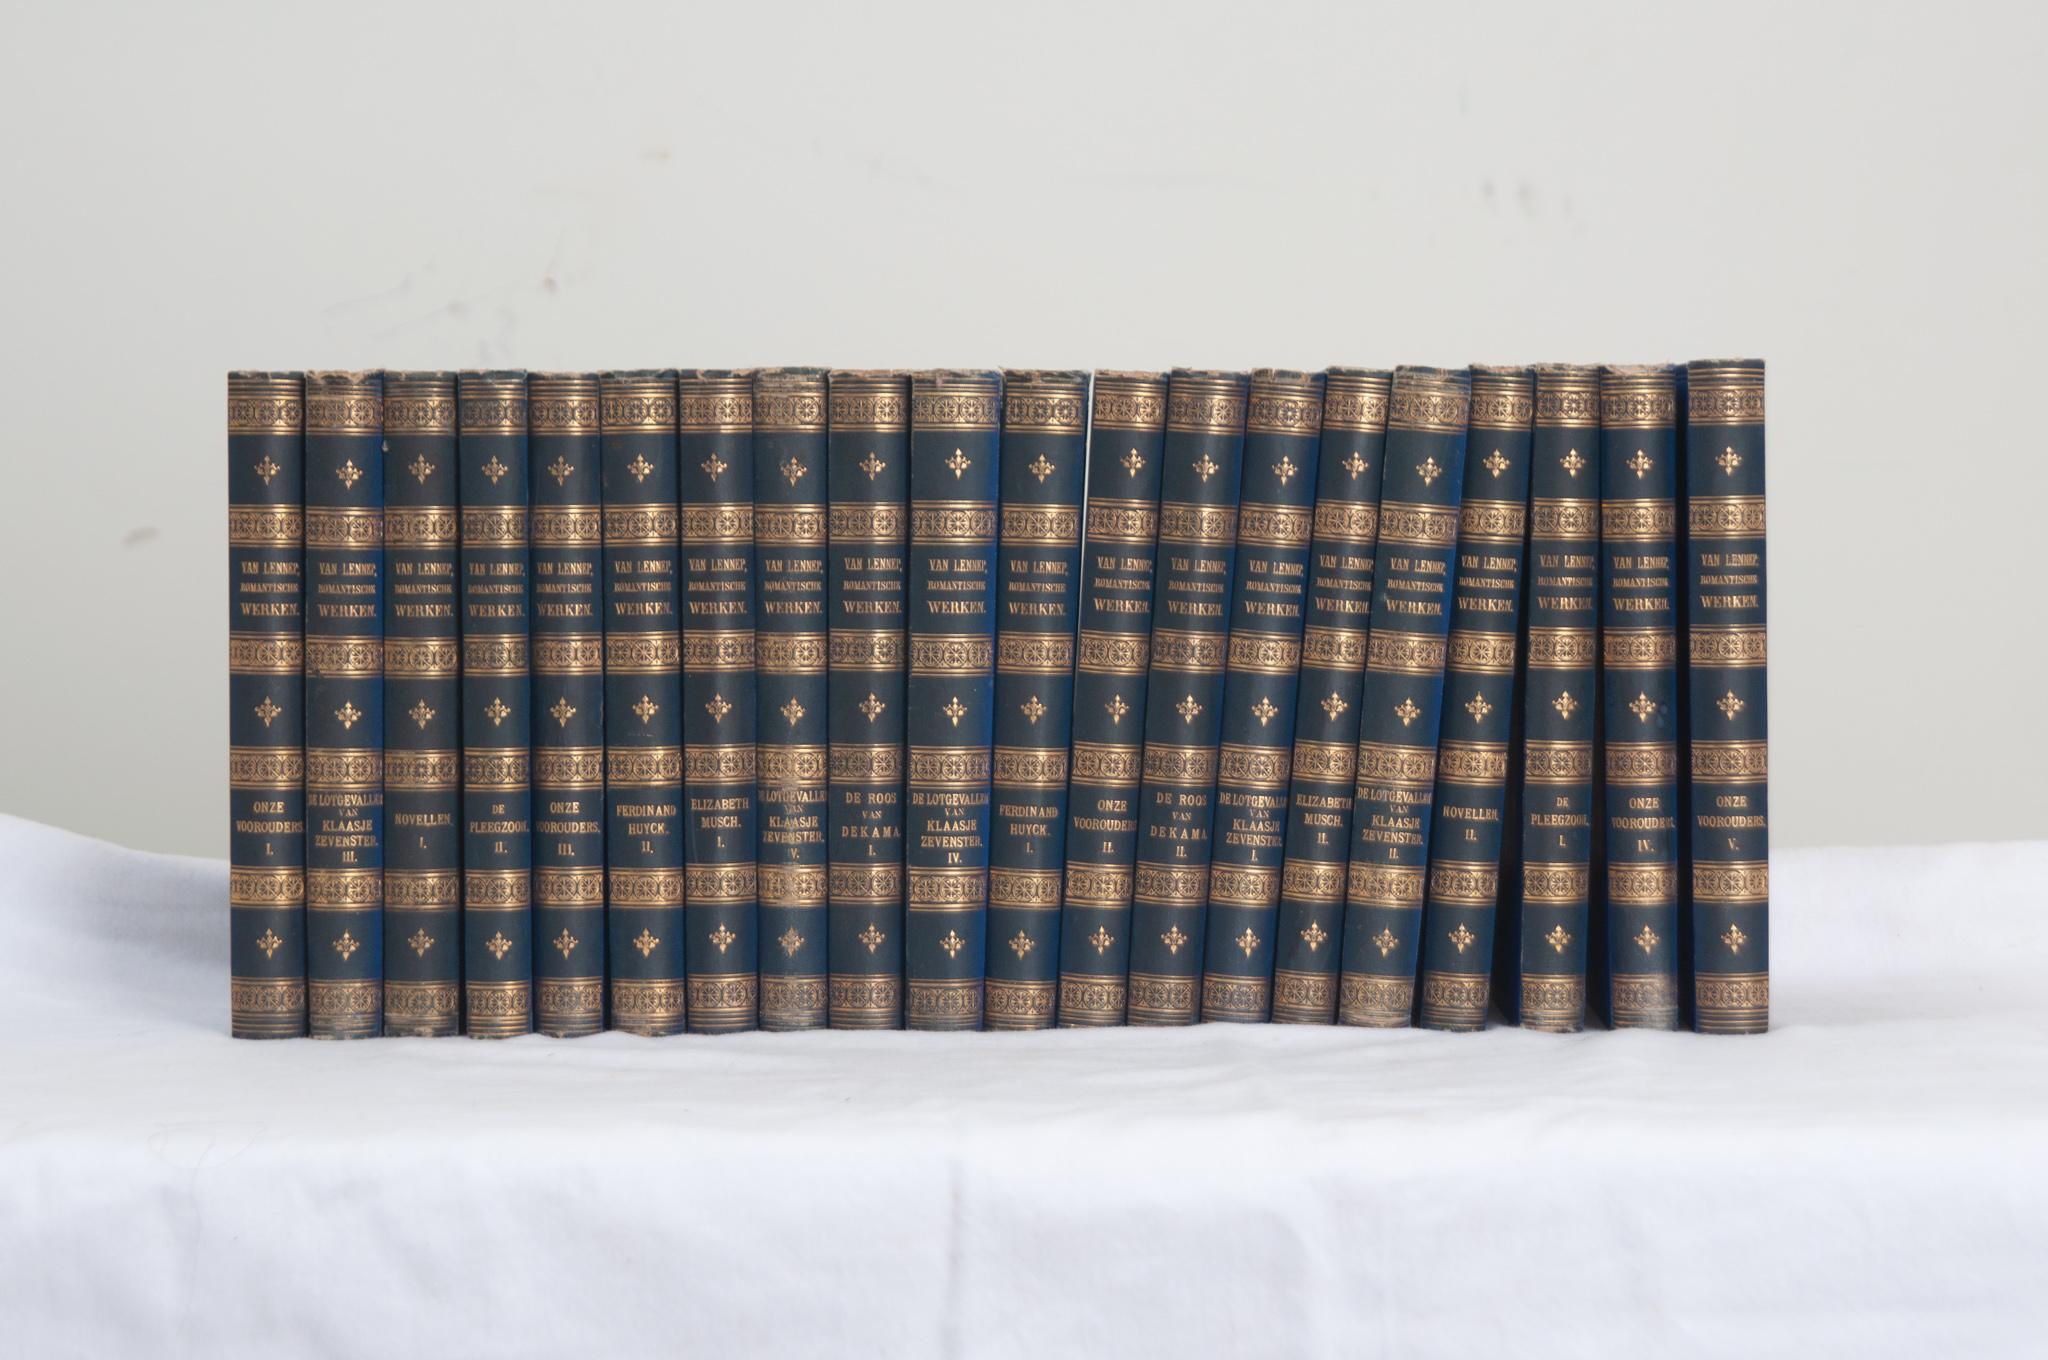 A collection of twenty volumes of novels by Dutch author J. Van Lennep.  Leather bound with gold lettering, this set includes multiple works from the novelist. The pages have signs of discoloration, make sure to view the detailed images for a closer